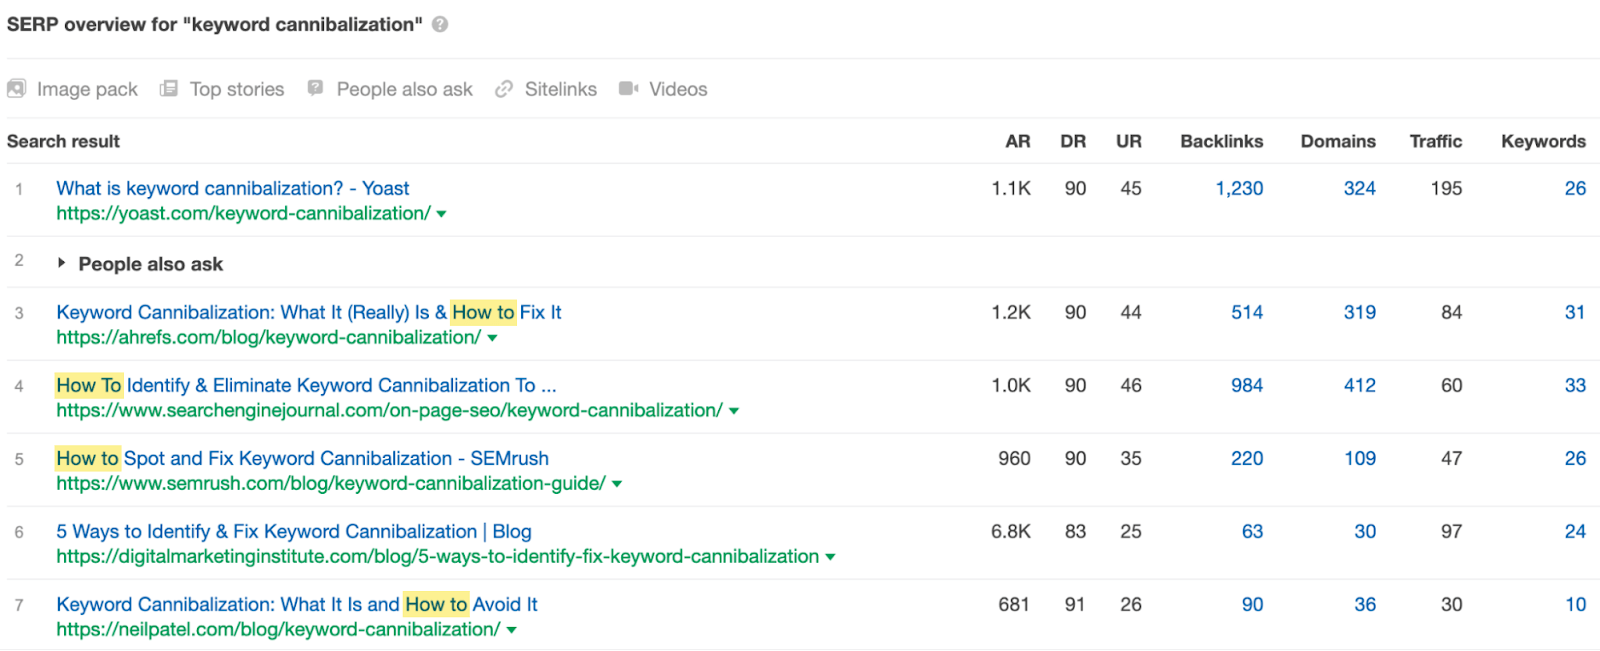 7-serp-overview-for-keyword-cannibalisation